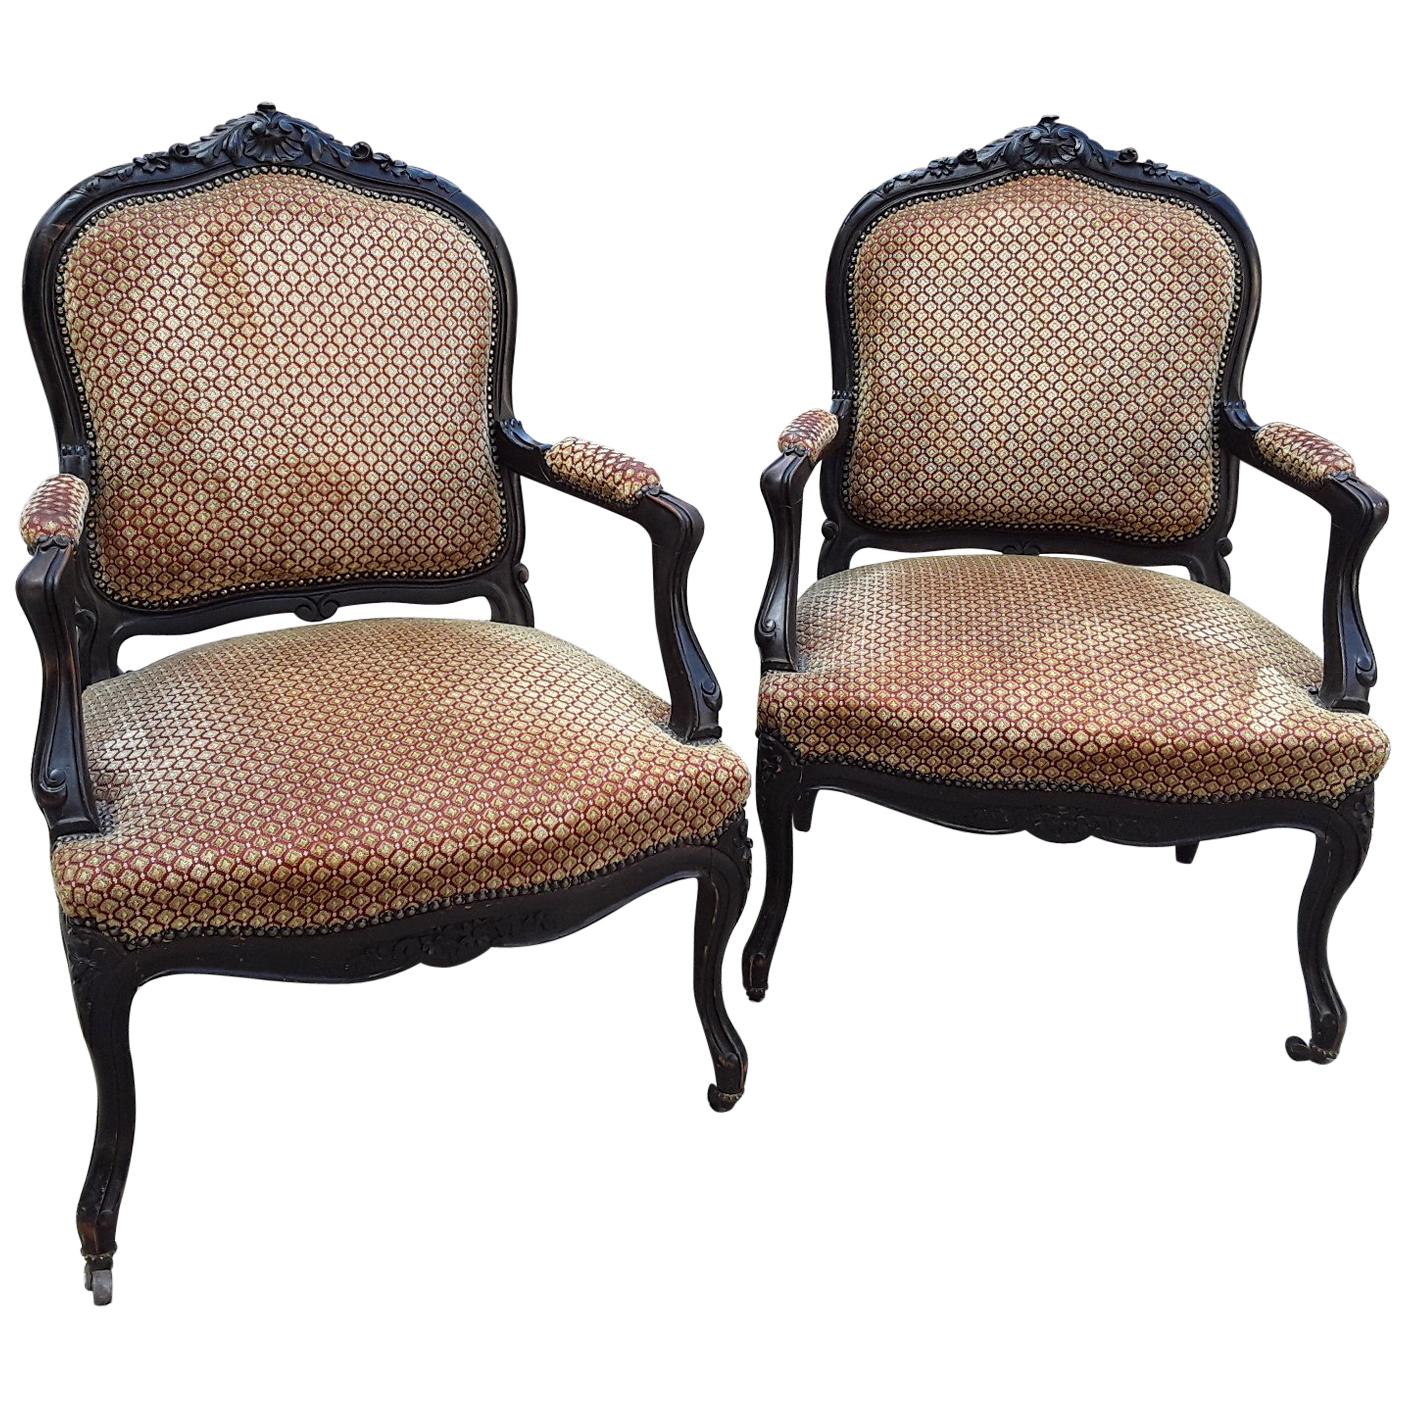 19th Century Pair of Italian Ebonized Wood Armchairs with Original Fabric, 1890s For Sale